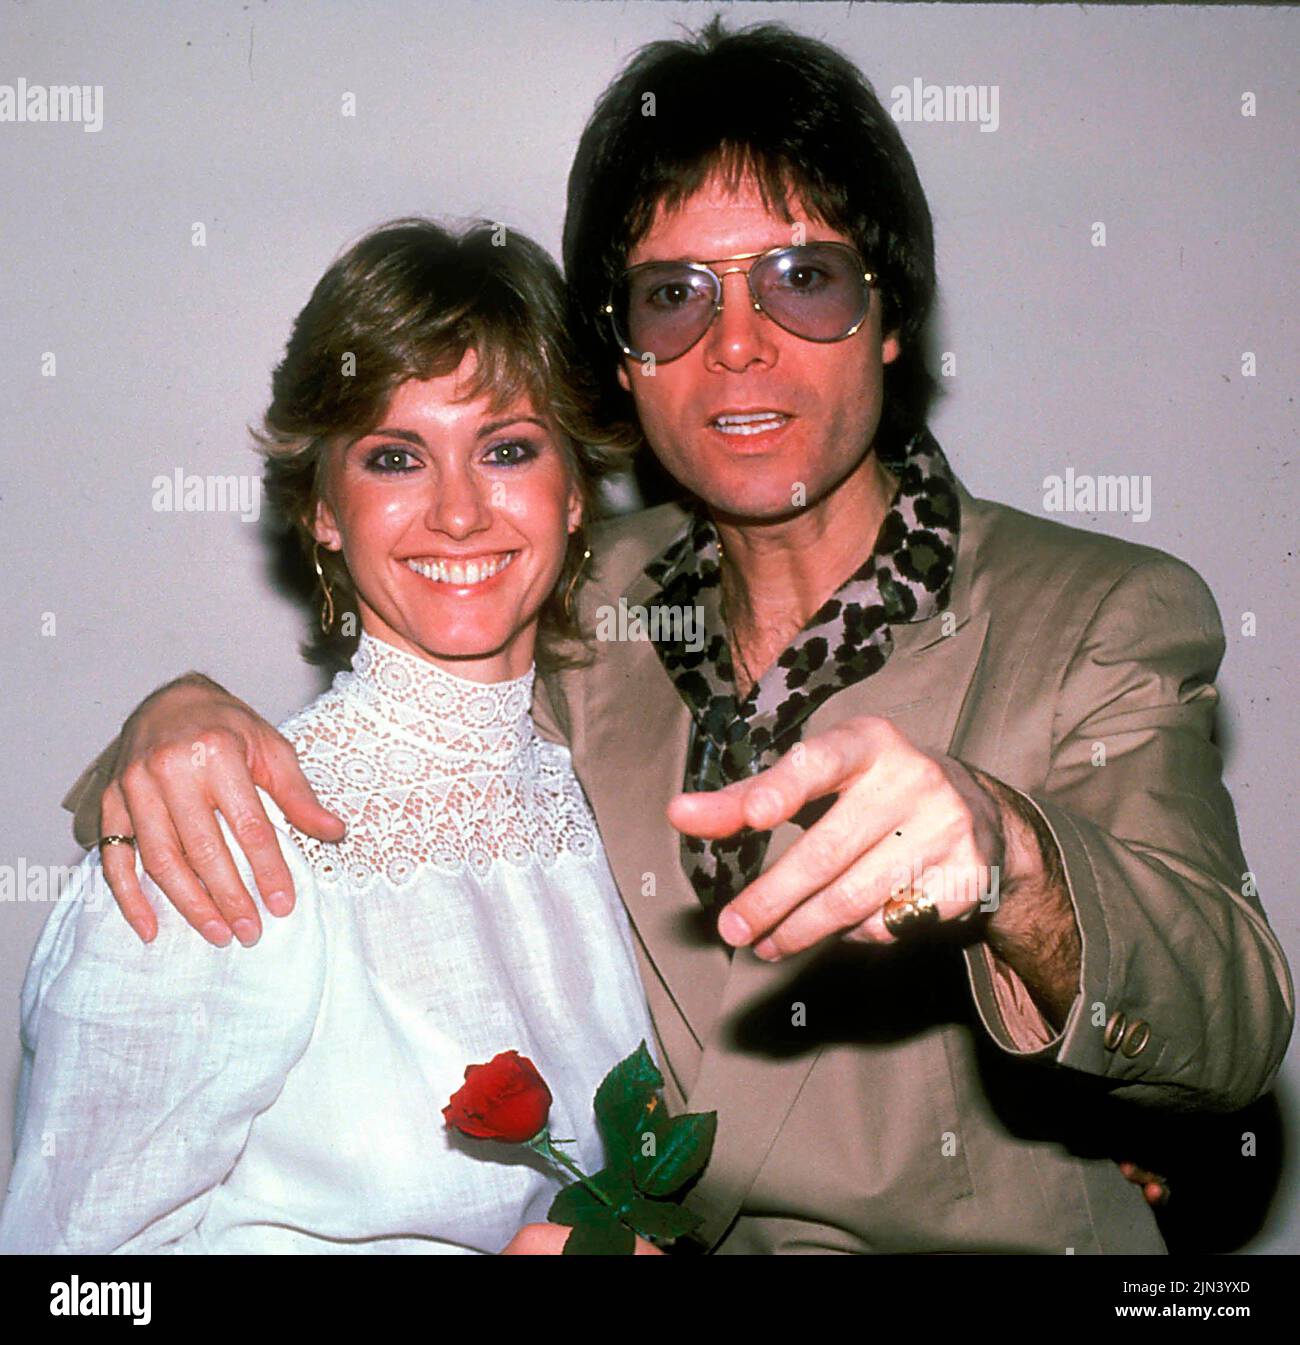 FILE PICS: Olivia Newton-John 1948-2022. Circa 1983, London, England, United Kingdom: Singers OLIVIA NEWTON JOHN and CLIFF RICHARD. 'Suddenly' is a duet performed by Olivia Newton-John and Cliff Richard from the soundtrack 'Xanadu,' and is the love theme from the 1980 film of the same name. Credit: Zuma Press/Alamy Live News Stock Photo